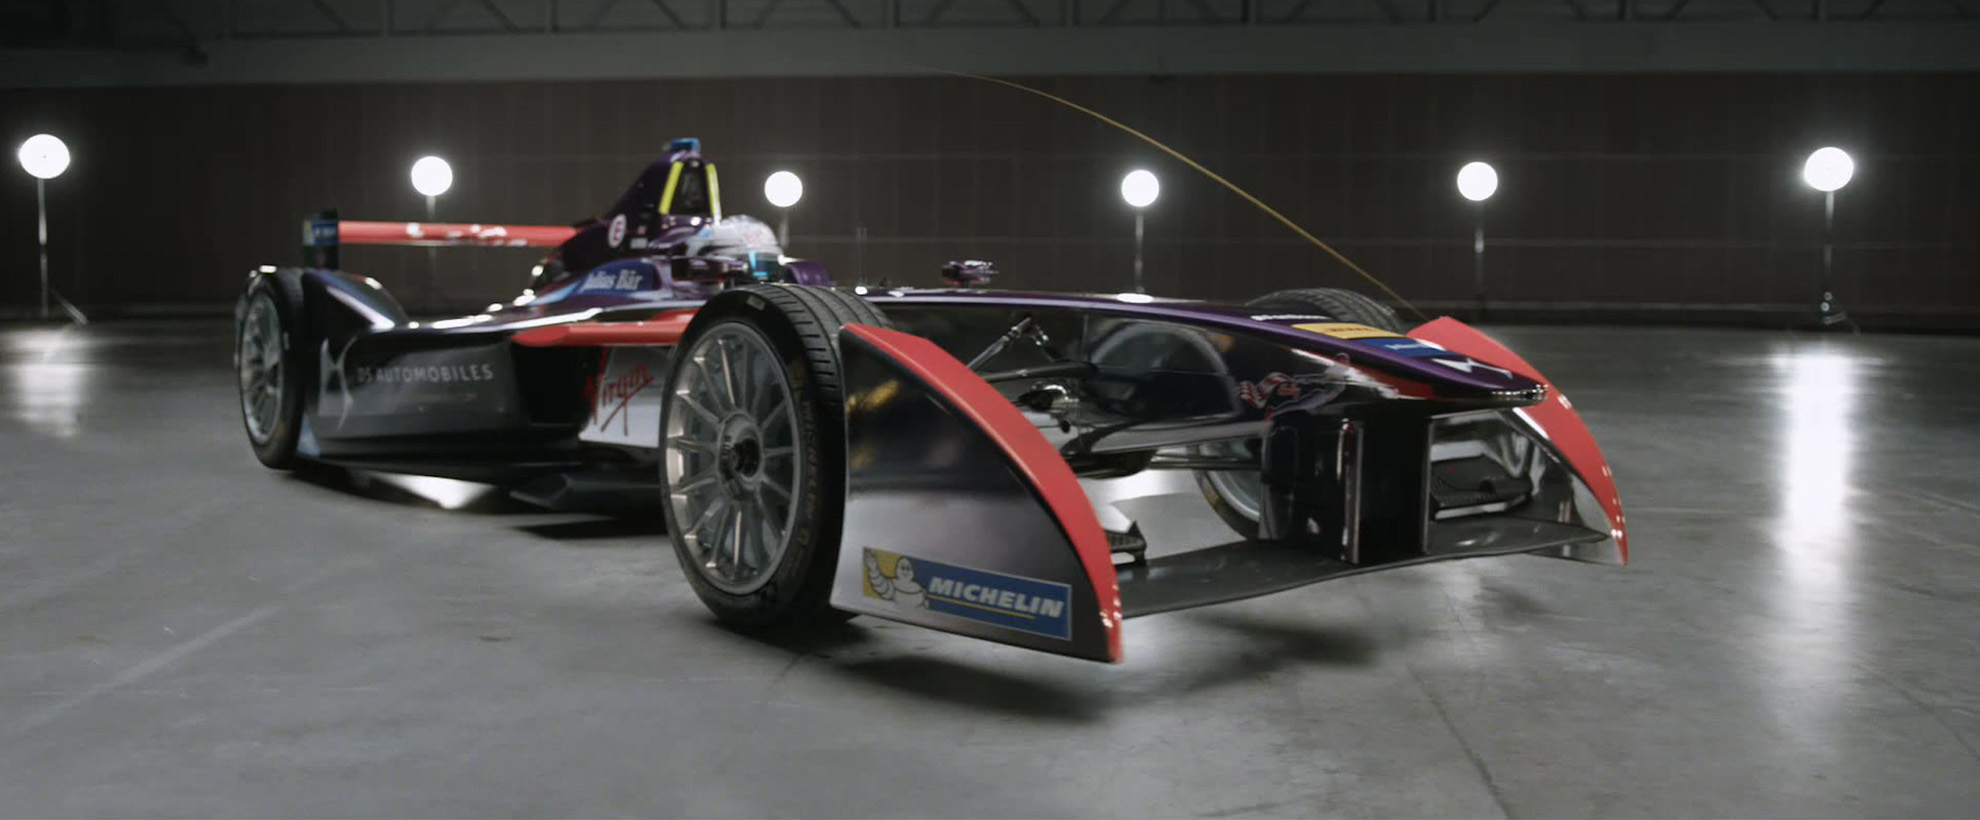 A formula E car with the front pointing towards the camera at a 45 degree angle, the car is in a large grey warehouse.